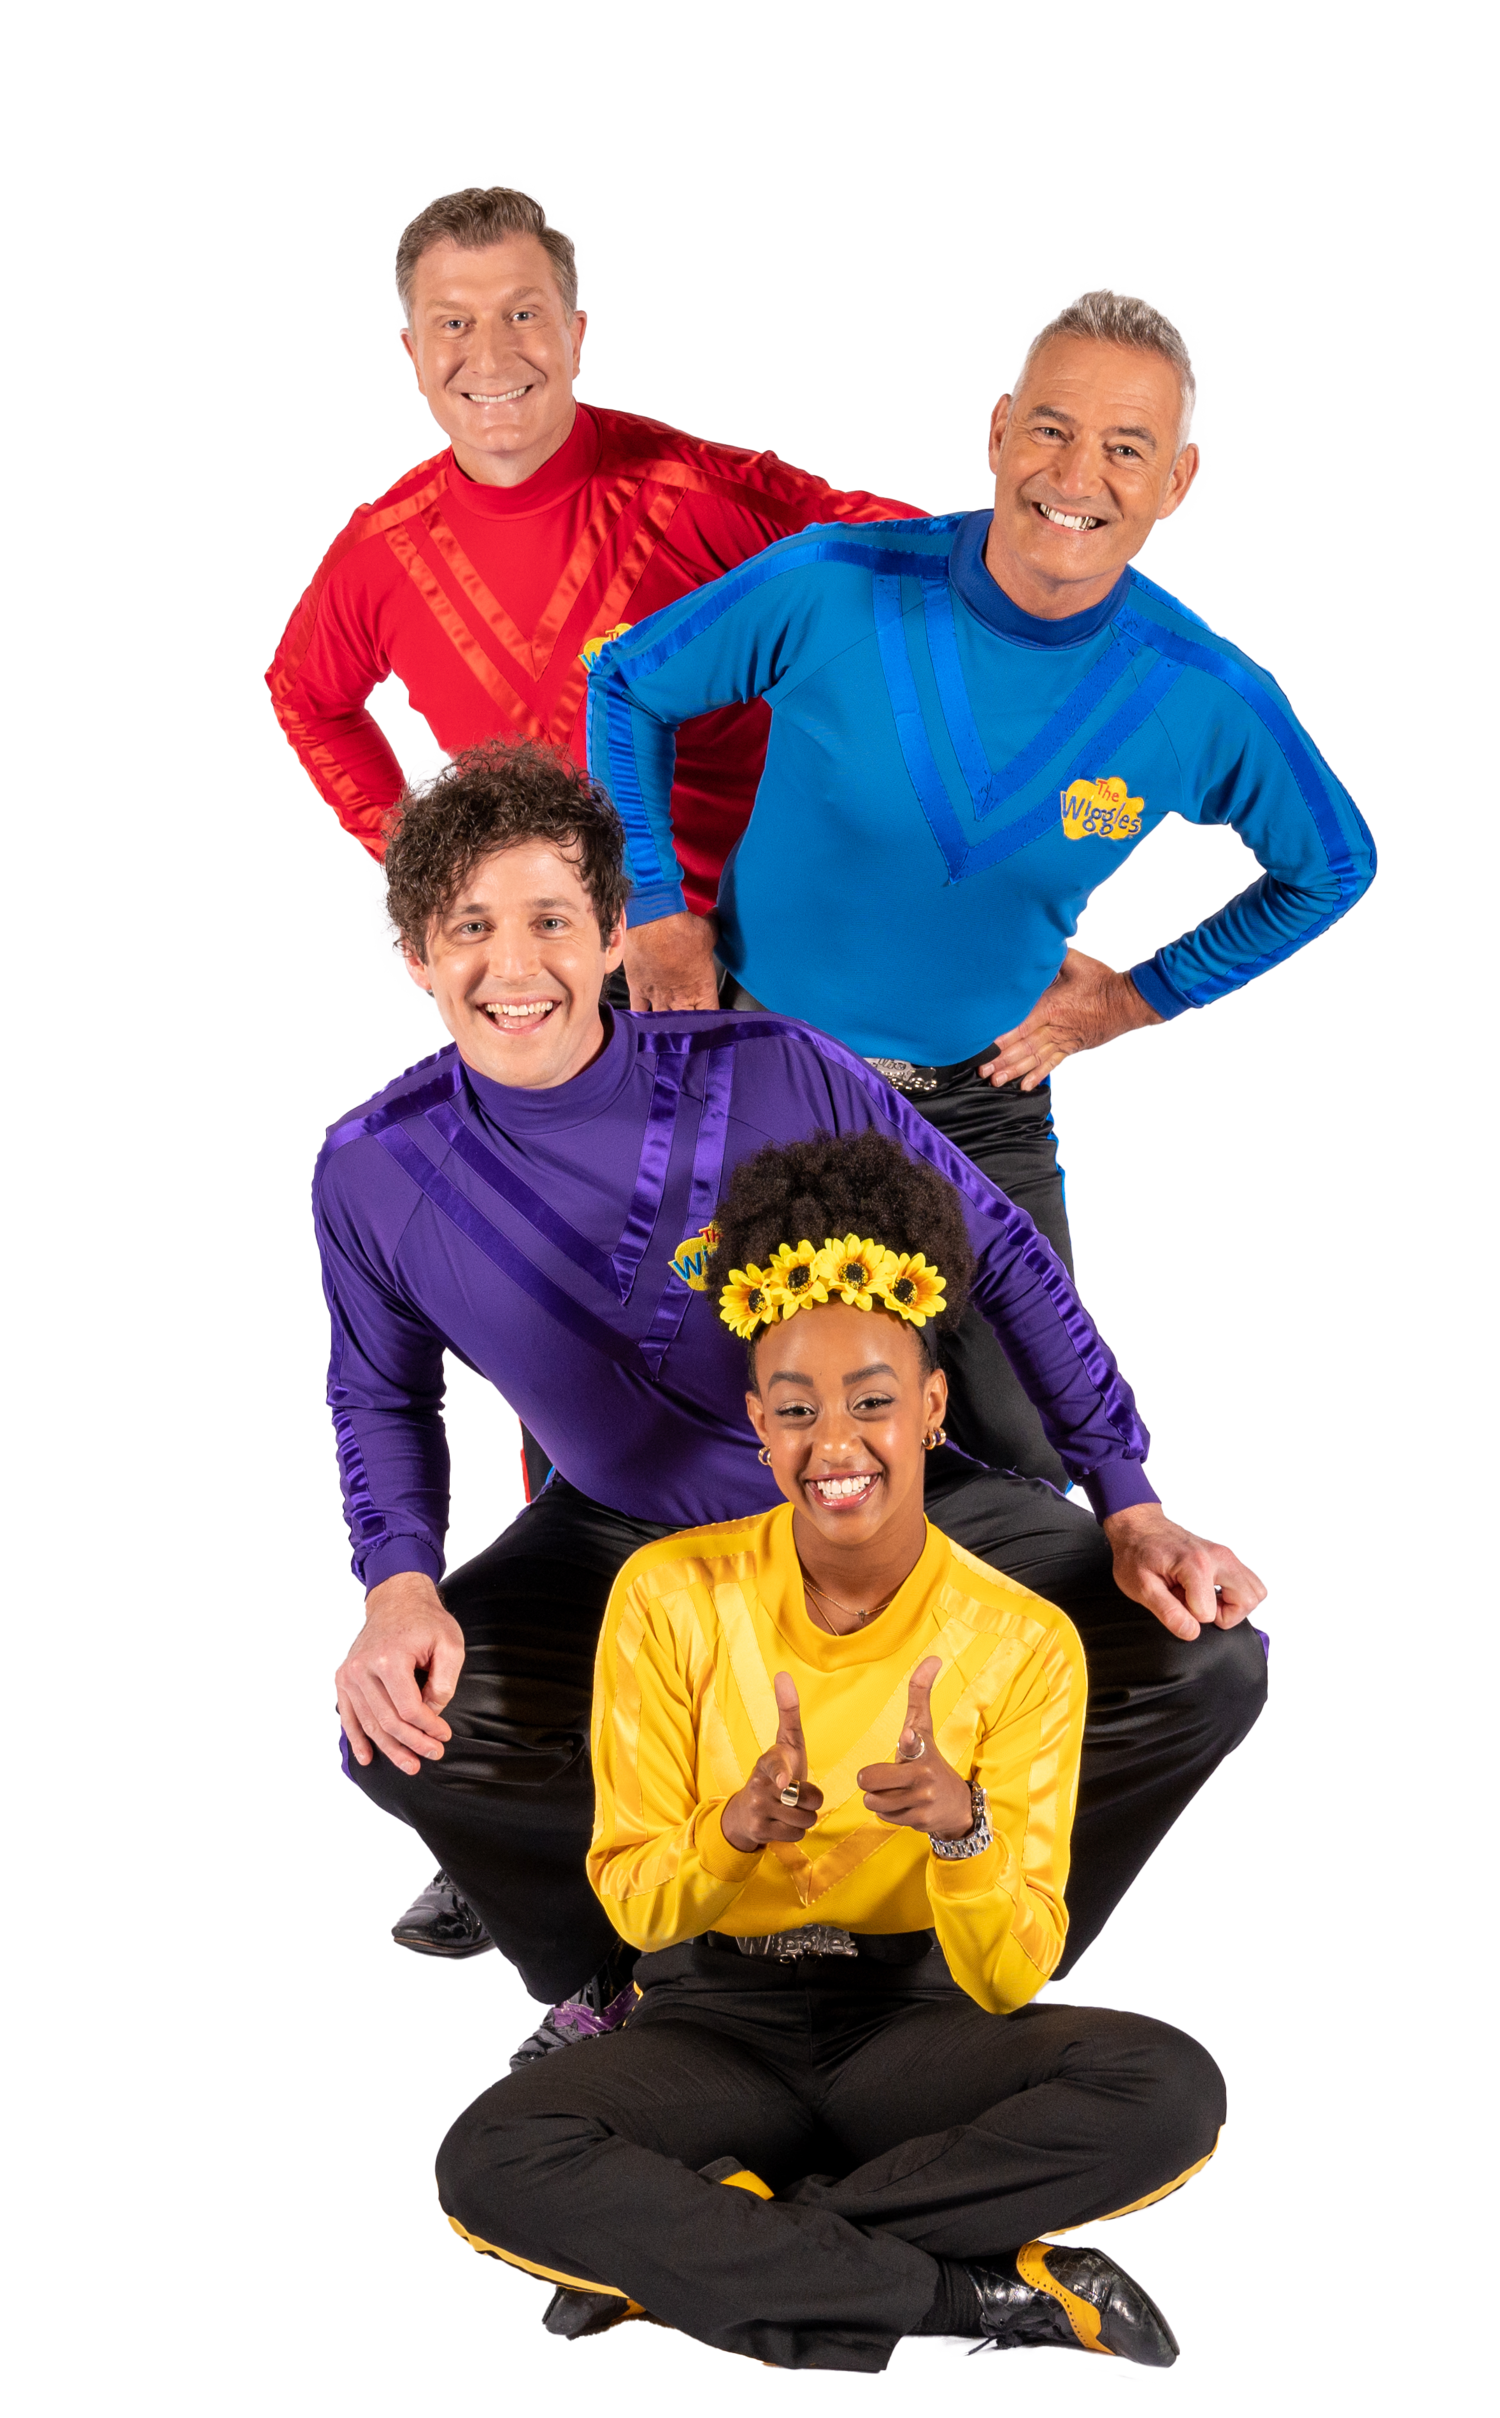 The Wiggles Sign Exclusive, Global Deal With Universal Music Publishing  Group